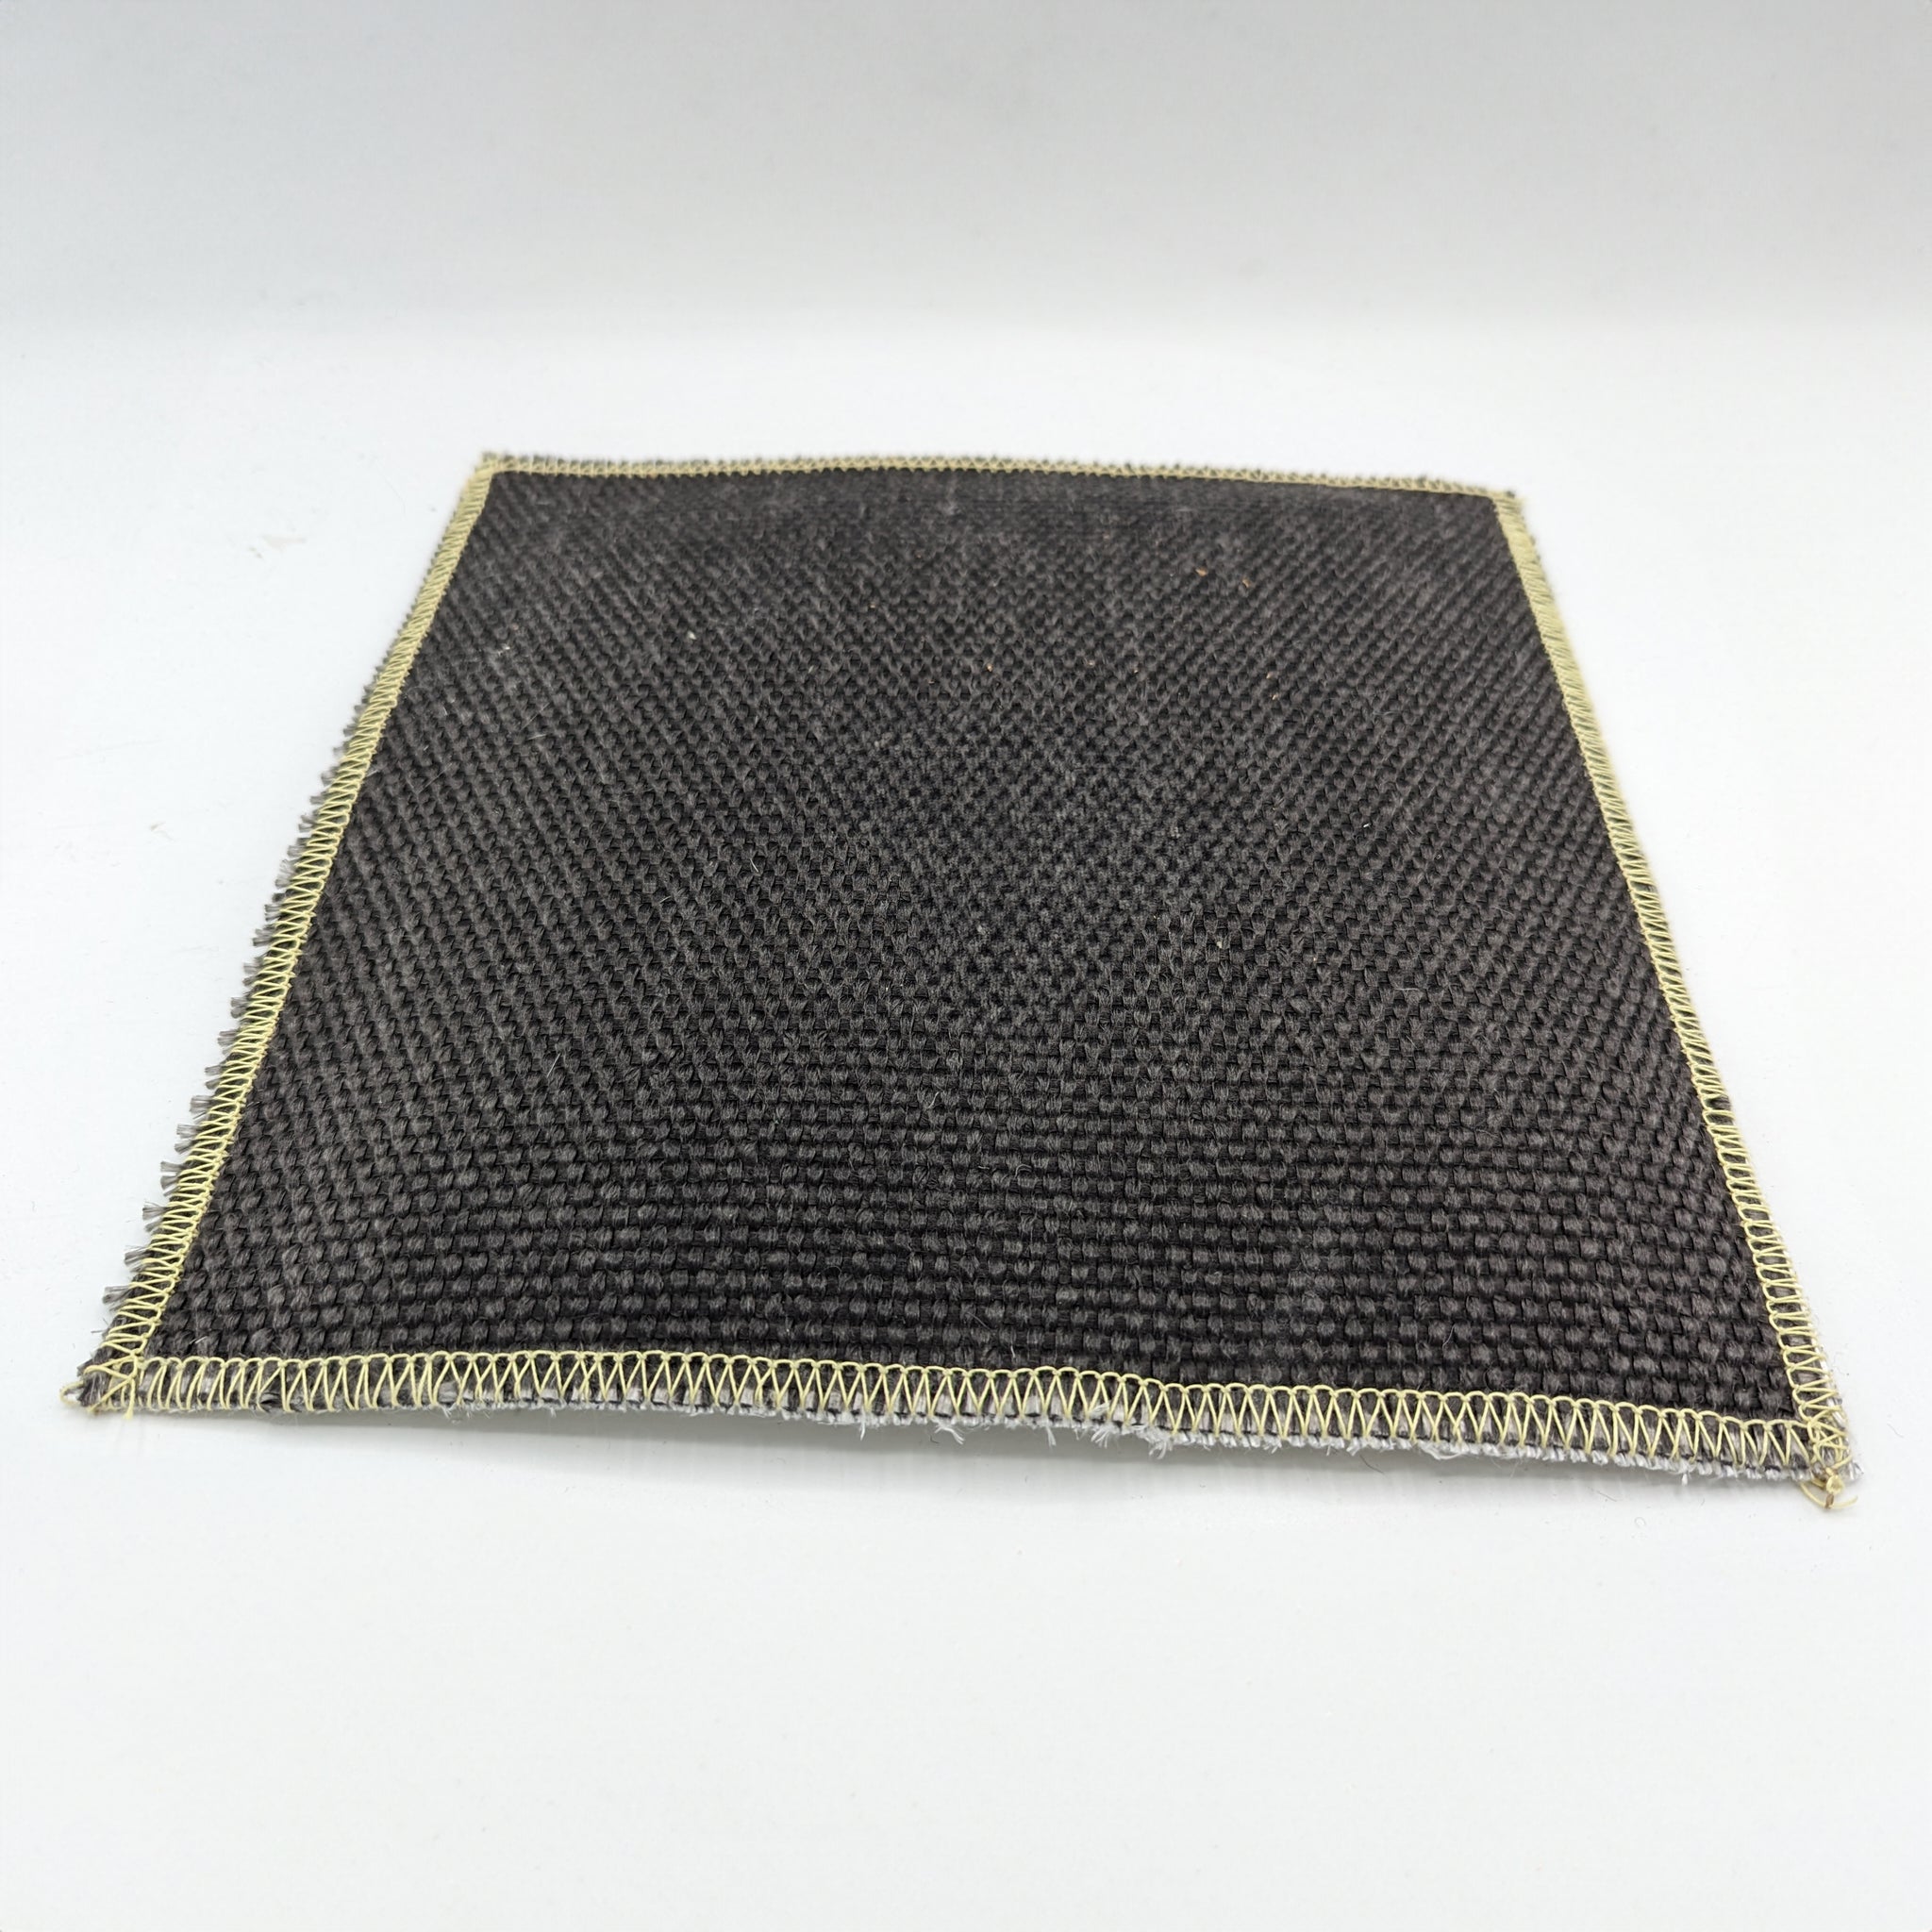 600ºC Gamasco 3 Layer Heat Resistant Plumbers Mat Silica/Graphited Cloth 250mm x 250mm